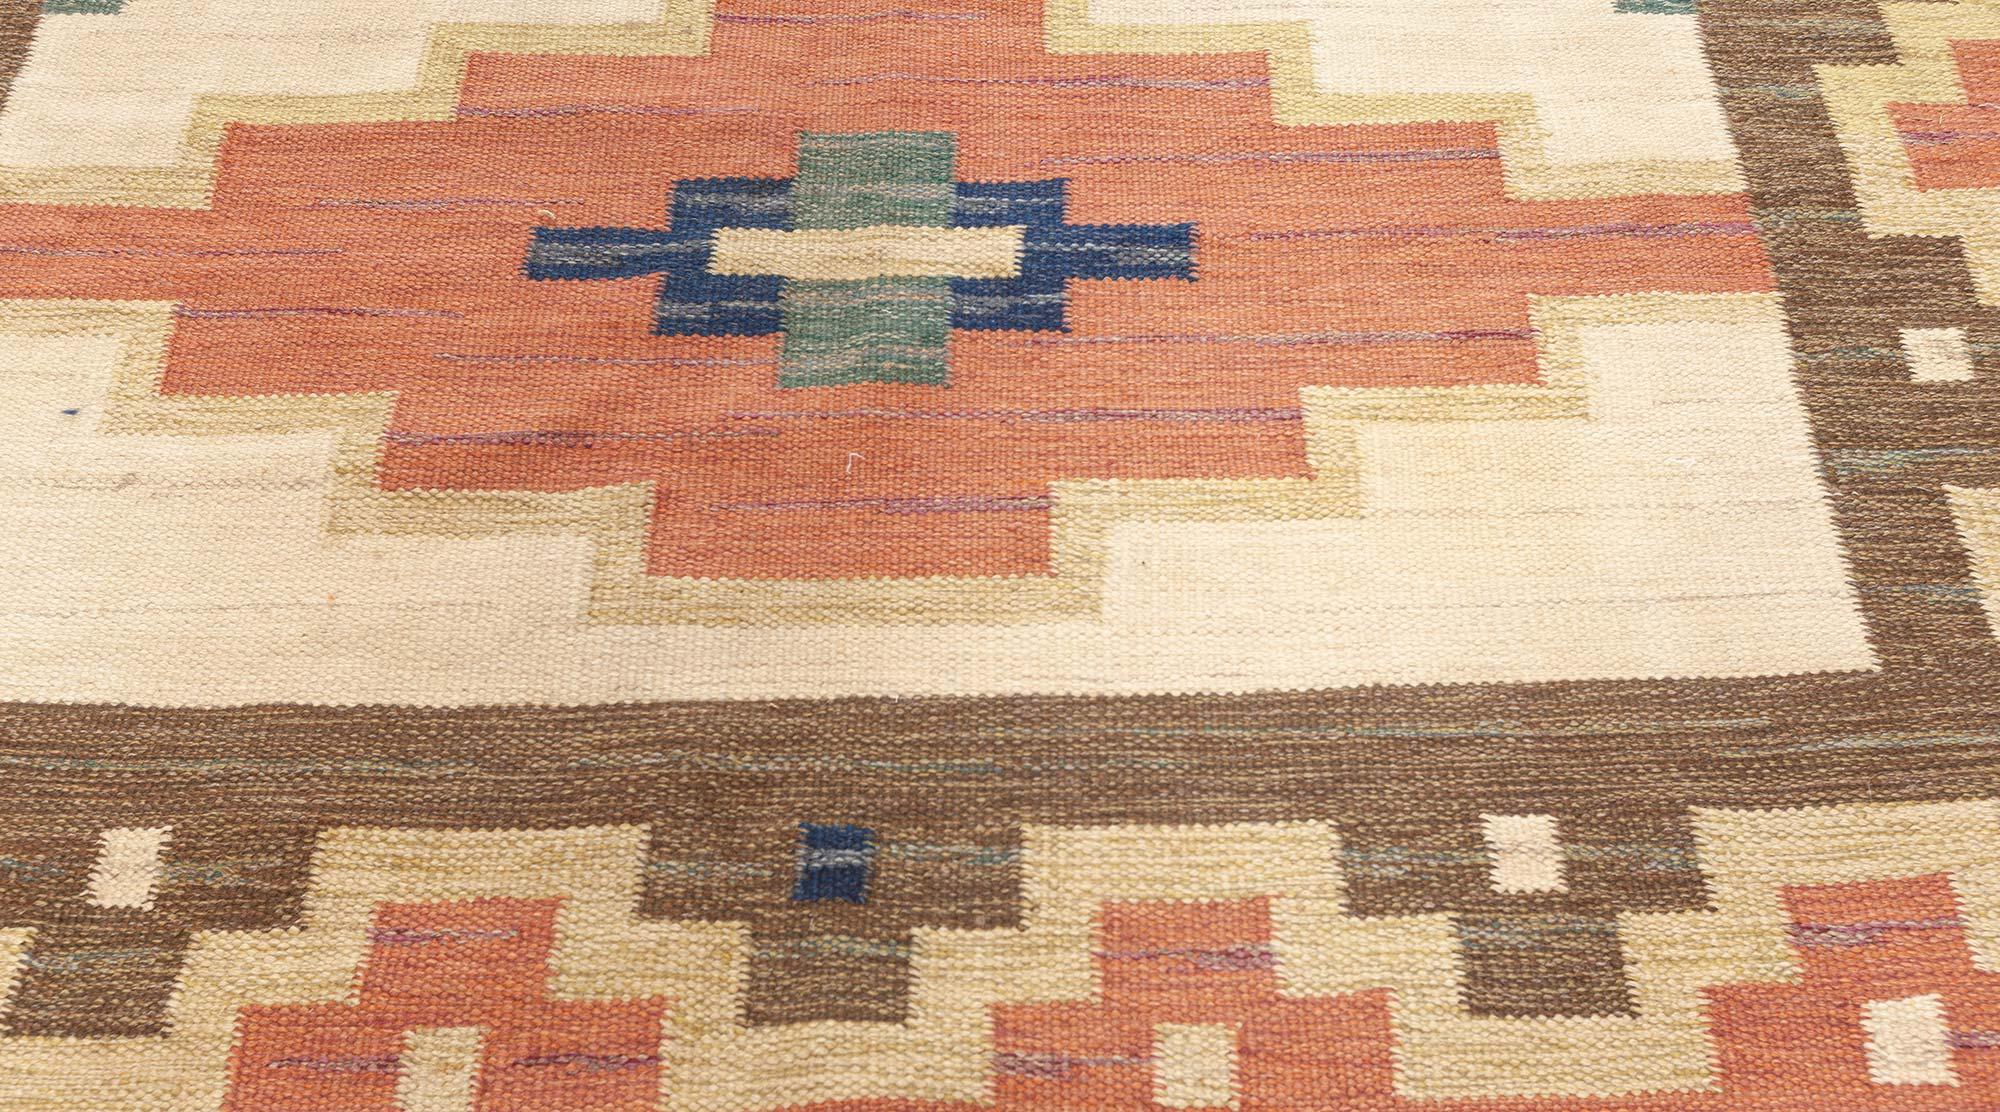 Hand-Woven Vintage Swedish Flat Weave Rug Signed by 'Gk' For Sale